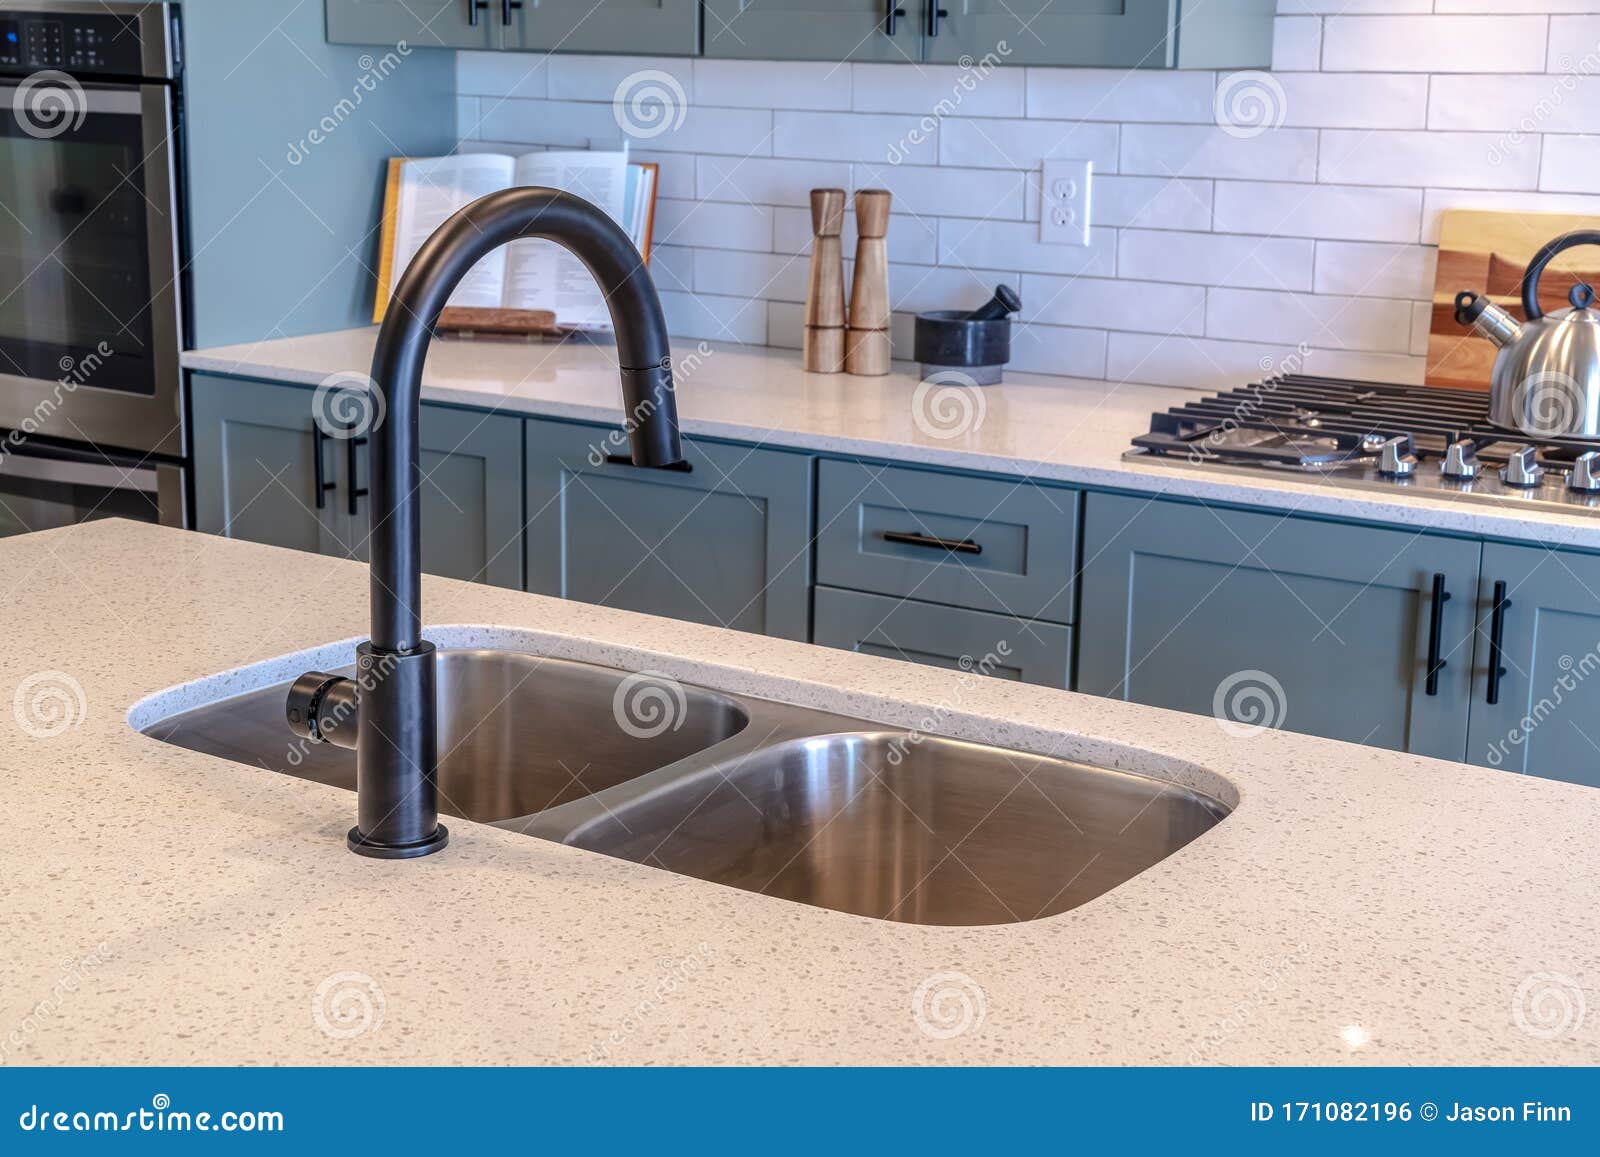 Double Bowl Sink and Black Faucet on Kitchen Island Against Cooktop and ...